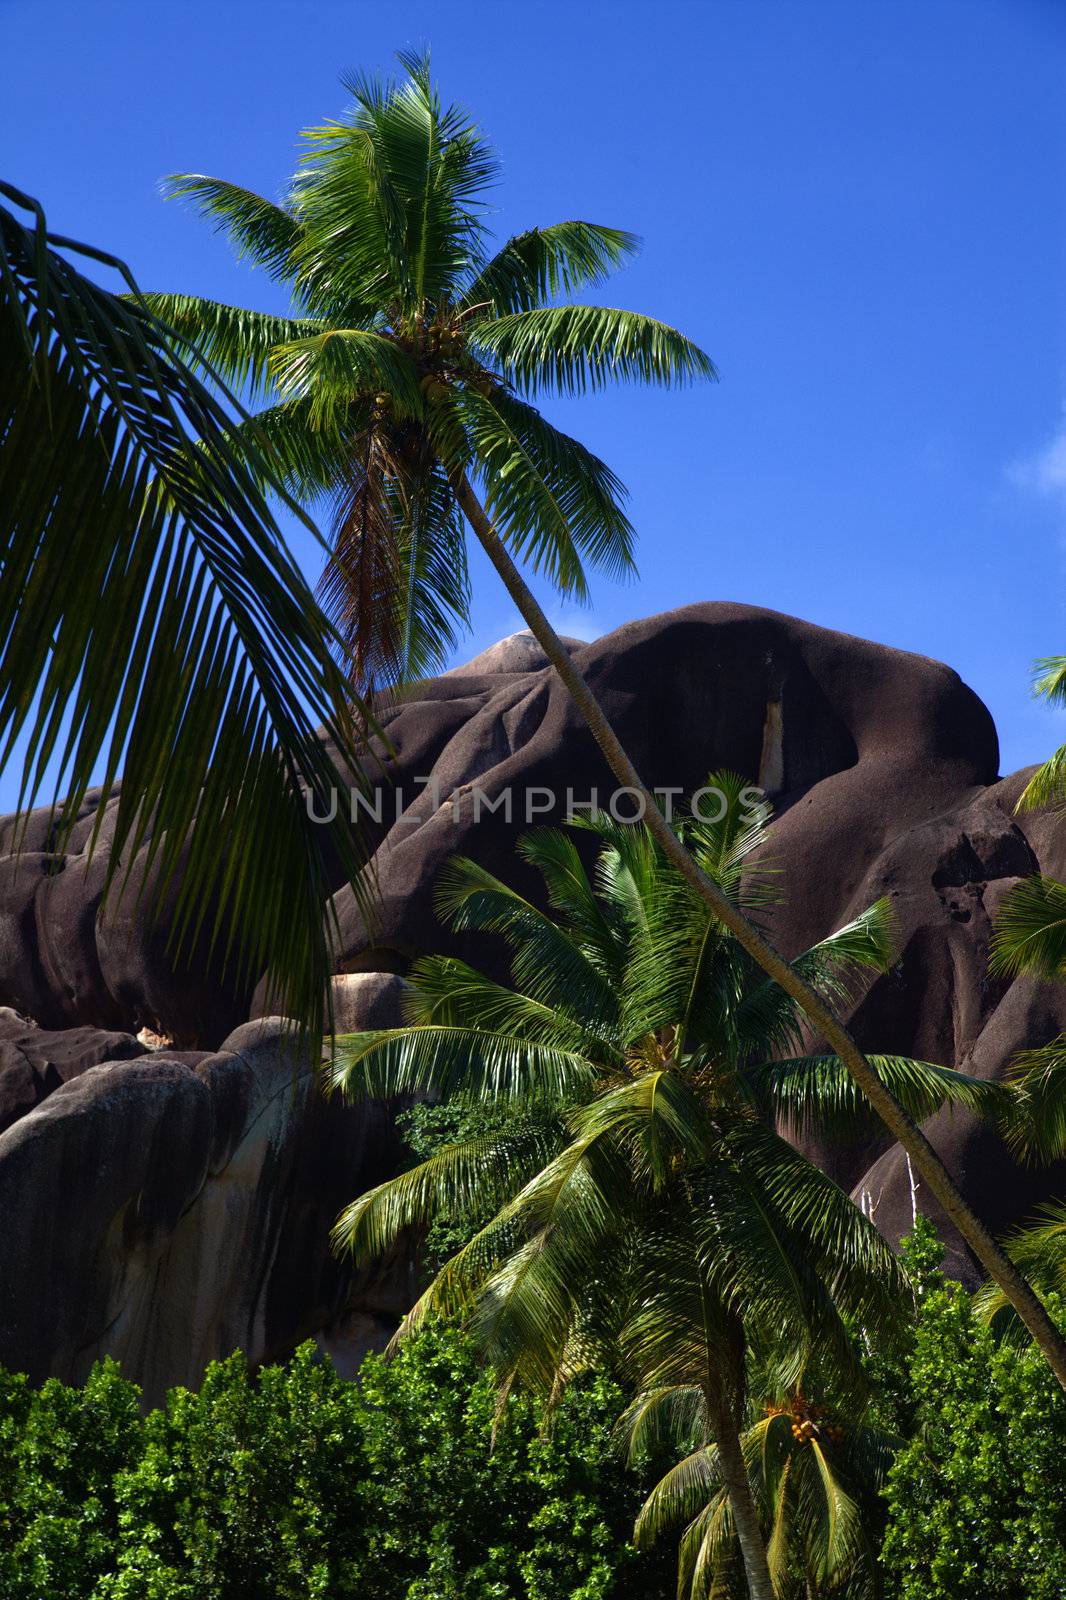 Beautiful tropical scene of weathered volcanic rock shoreline with palm trees